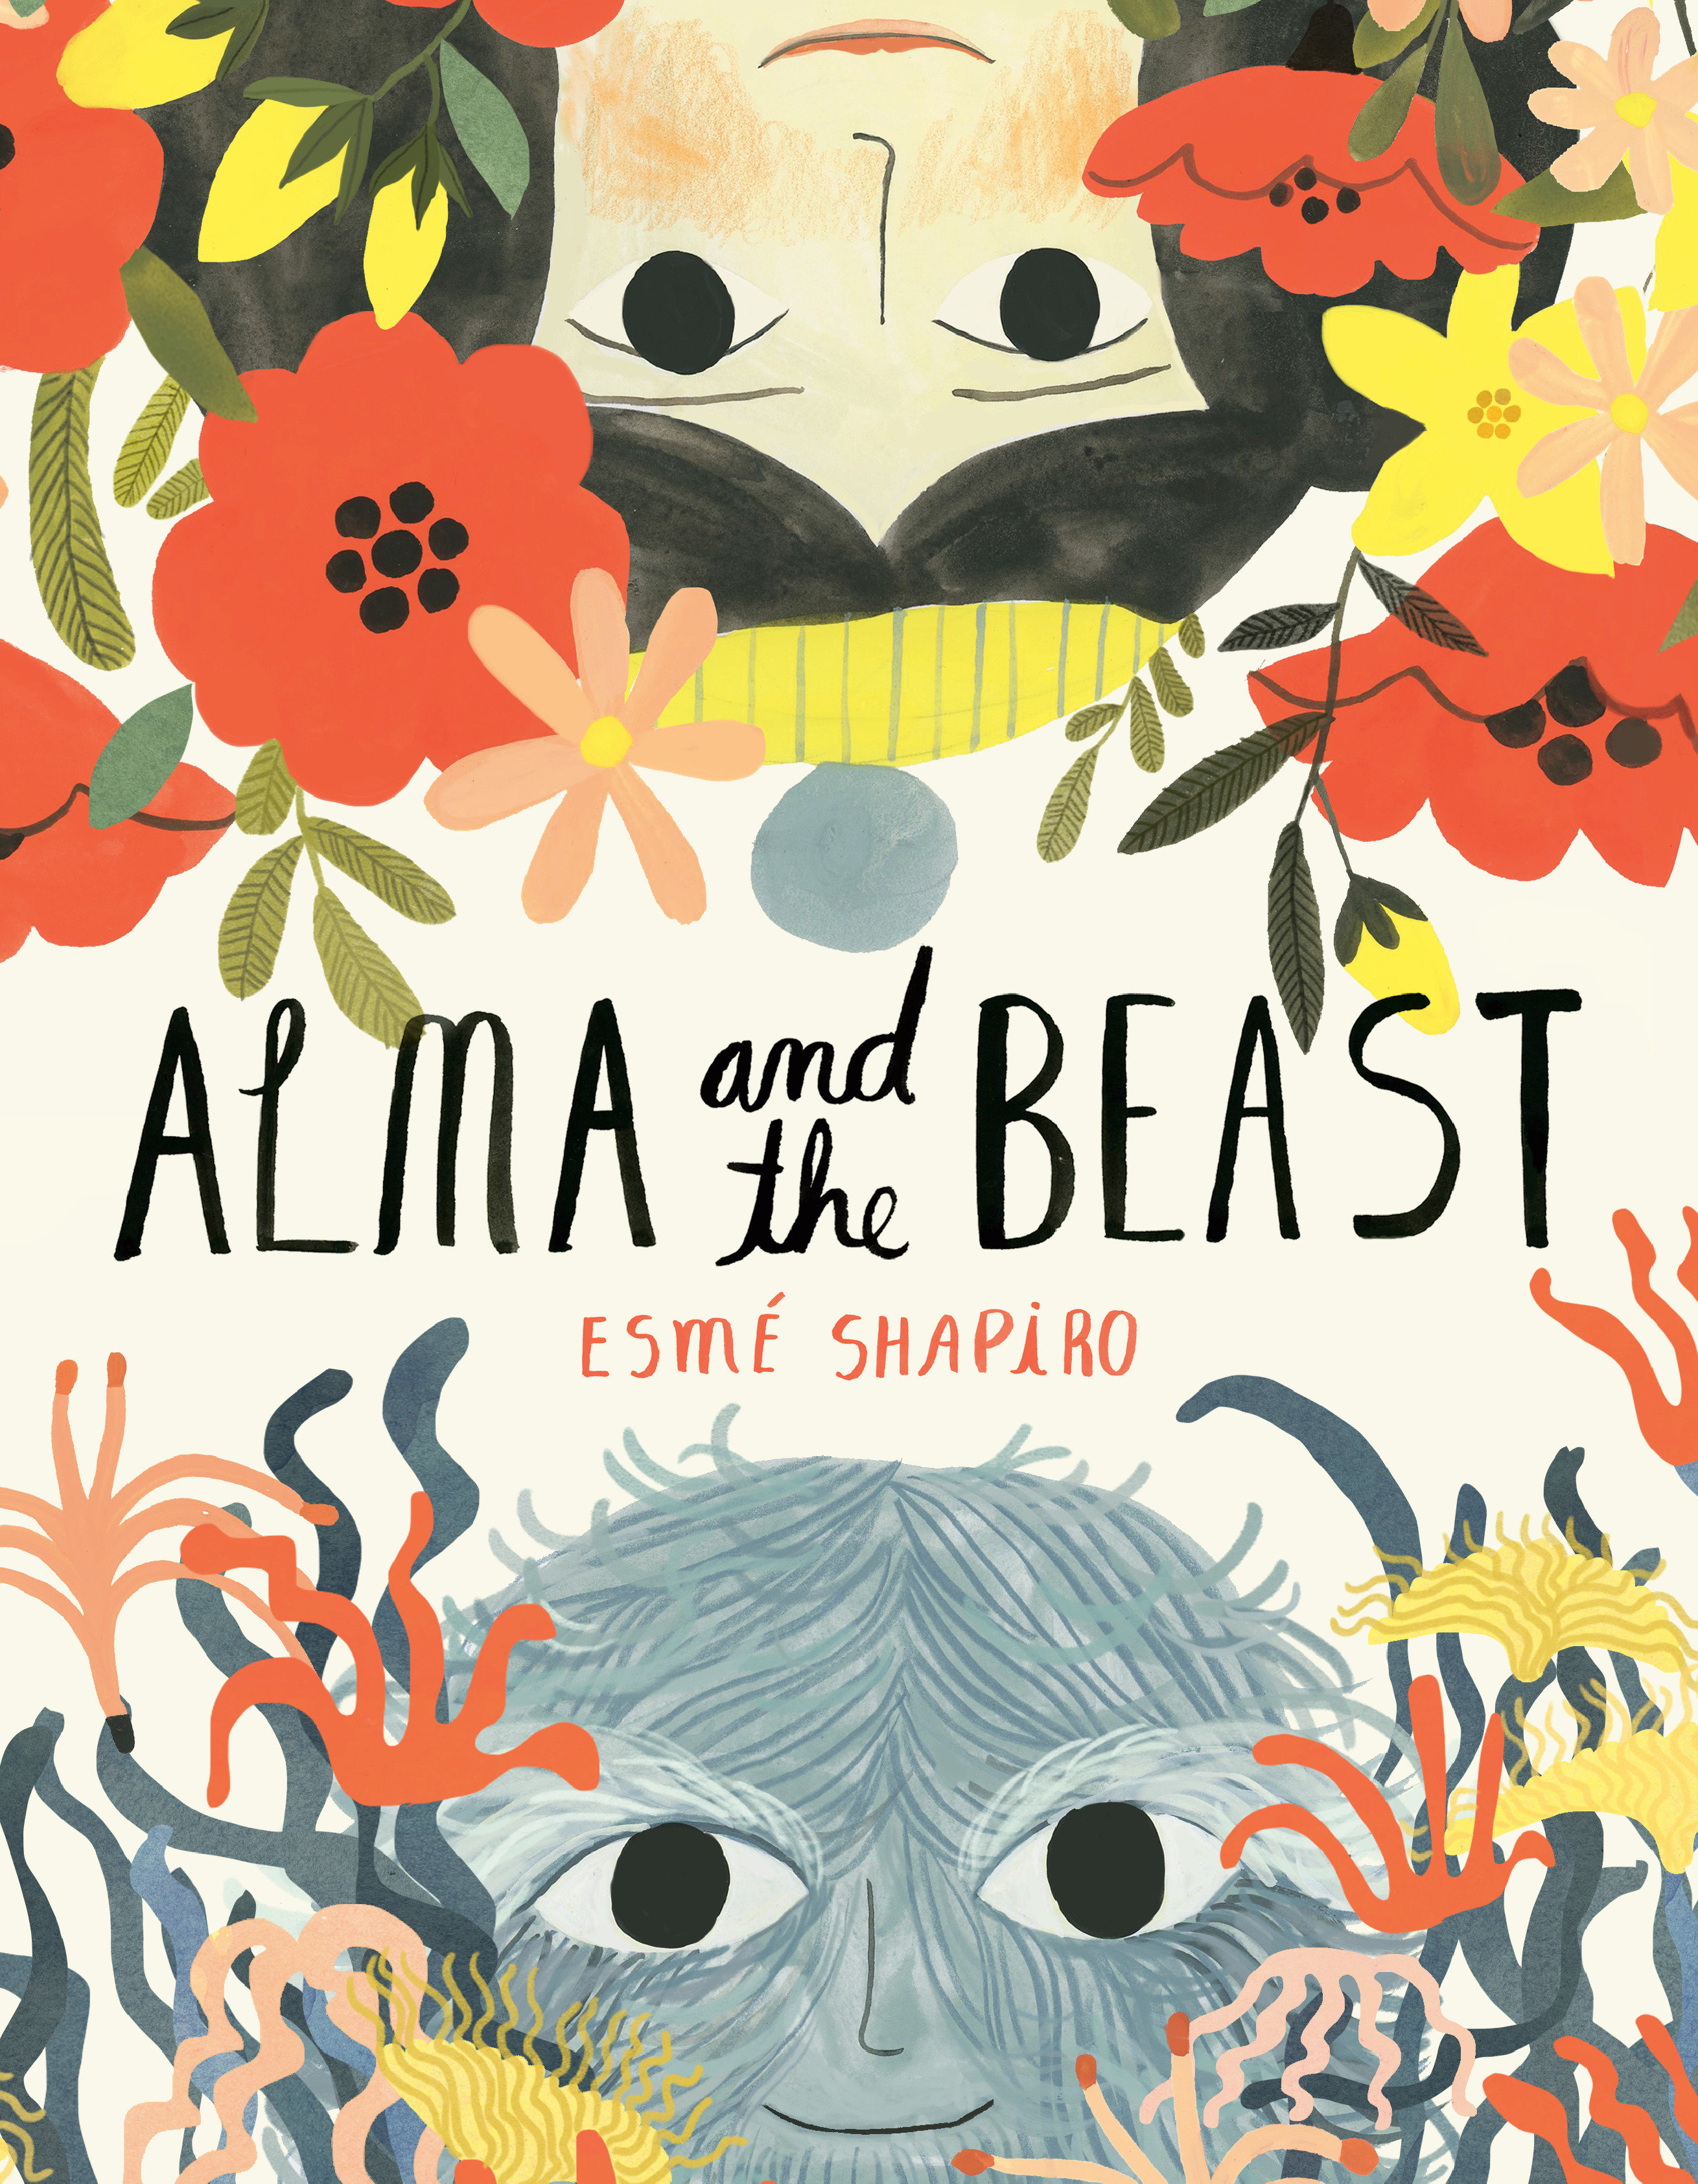 Alma and the Beast (Hardcover Book)